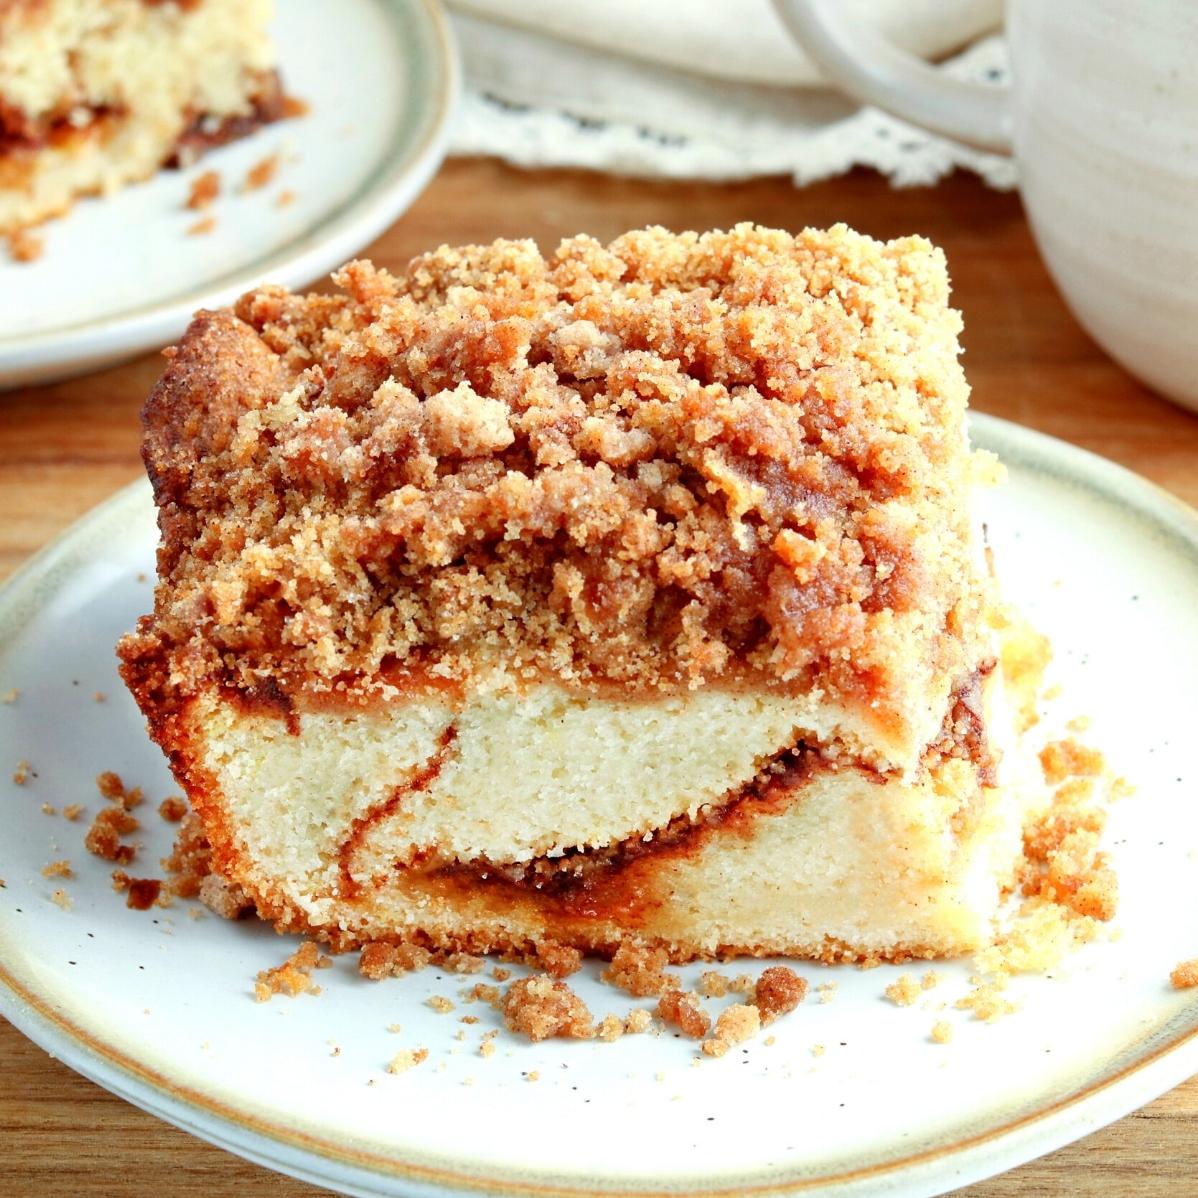  It's the perfect time of year to enjoy a slice (or two) of our gluten-free cinnamon streusel coffee cake.